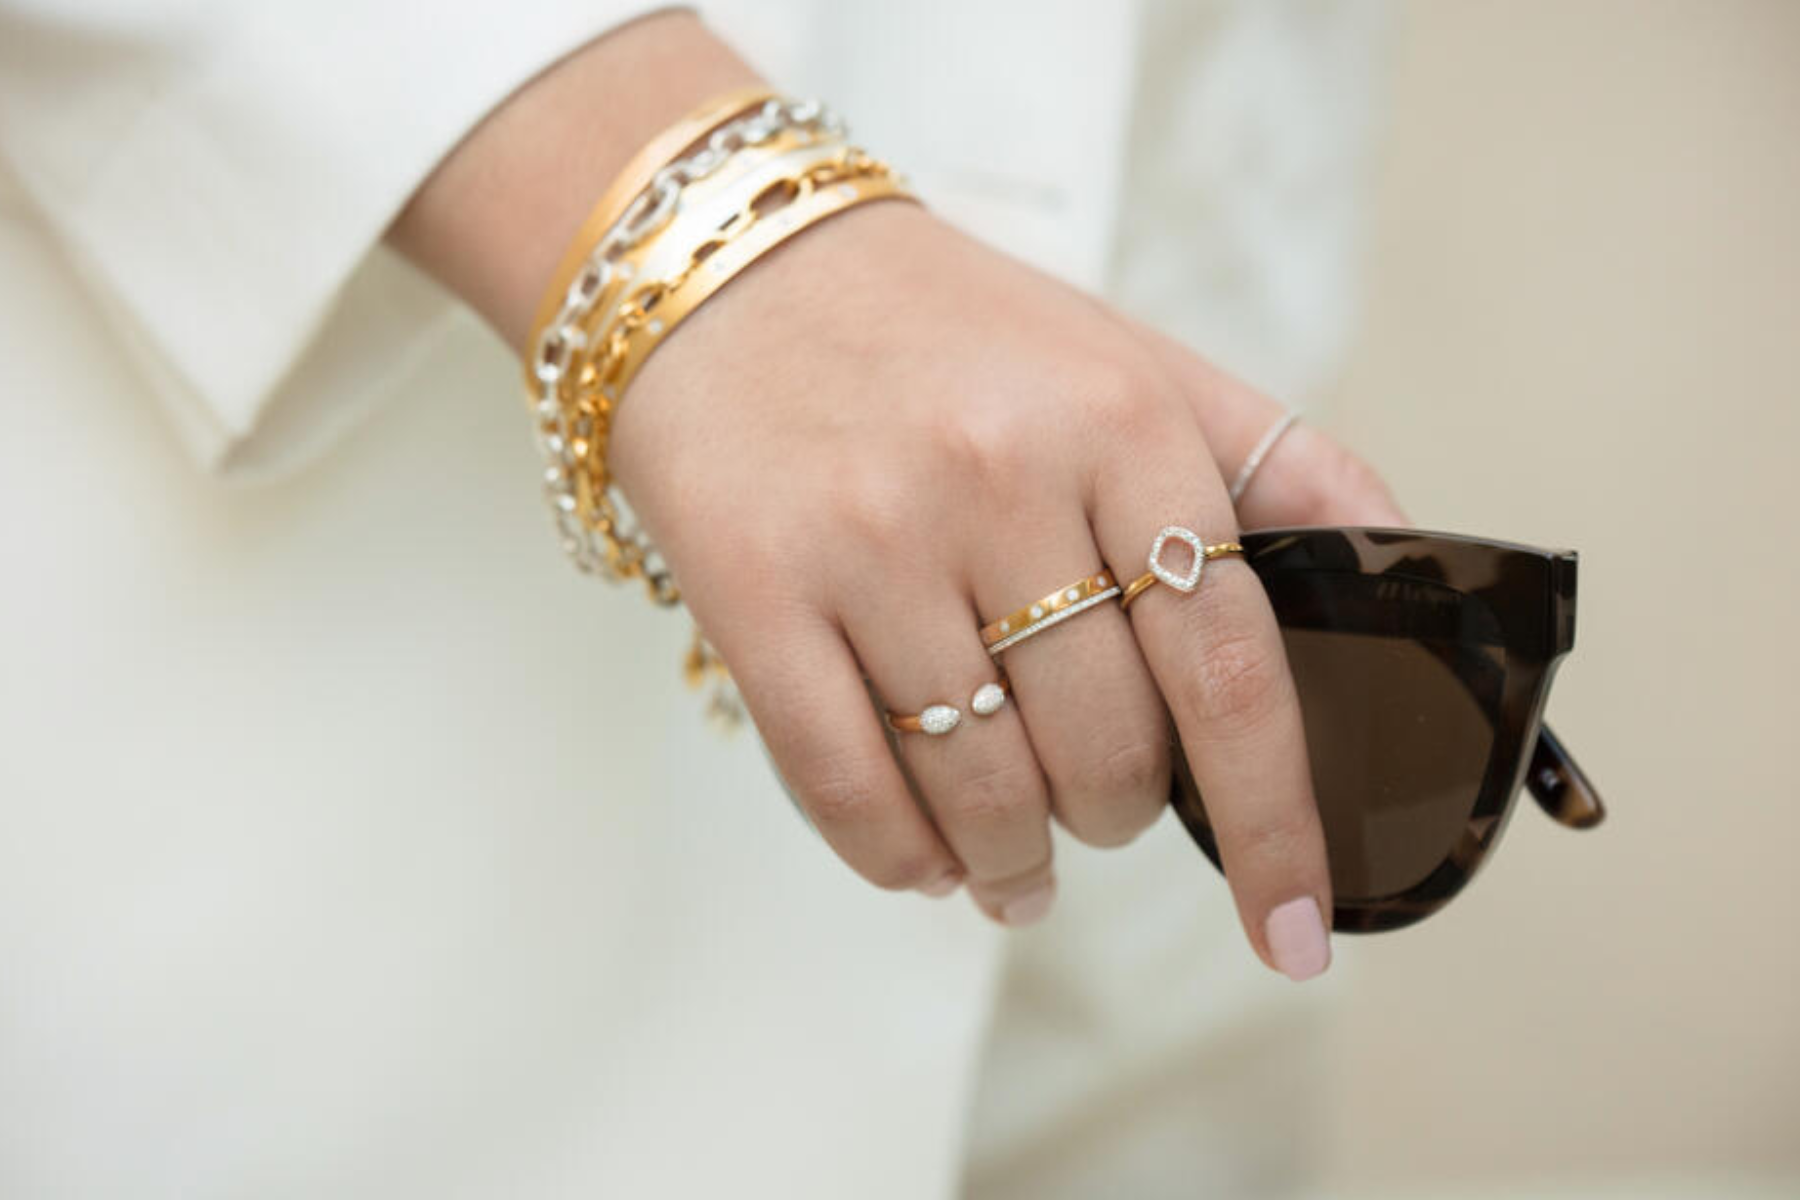 A stylish woman wearing dainty bracelets with other types of jewelry